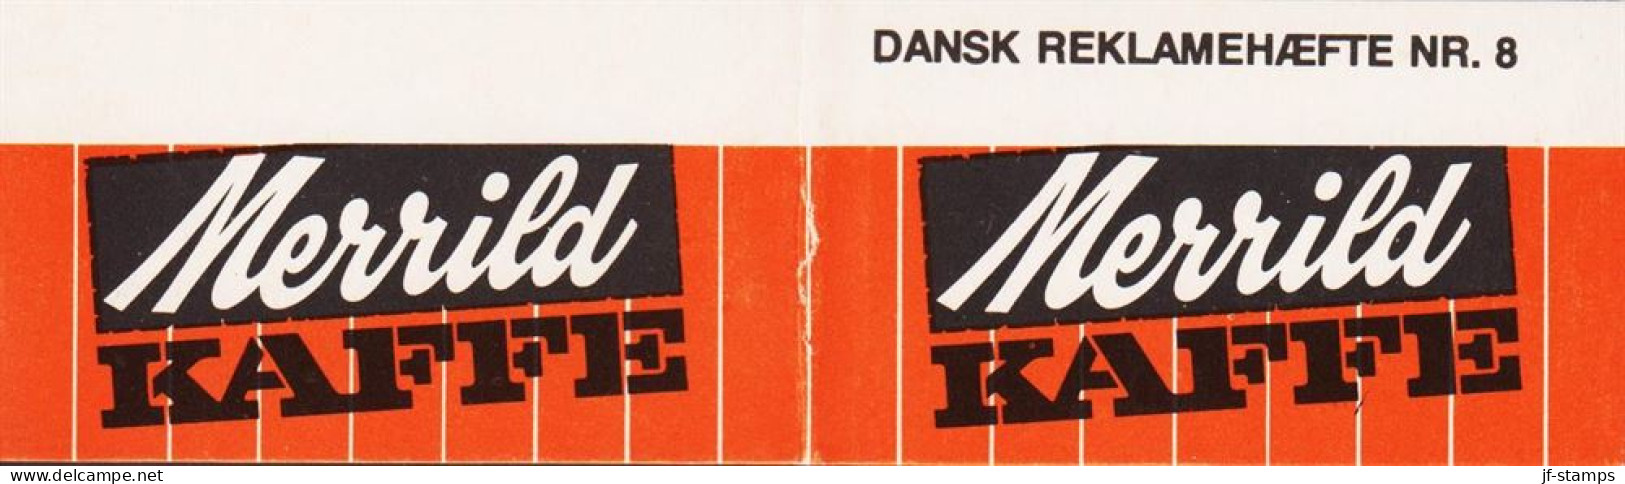 1977. GRØNLAND. TELE 90 Øre Falcon In Pair Together With 5 Øre Margrethe In 4stripe. DAN... (Michel 94 + 106) - JF545604 - Unused Stamps